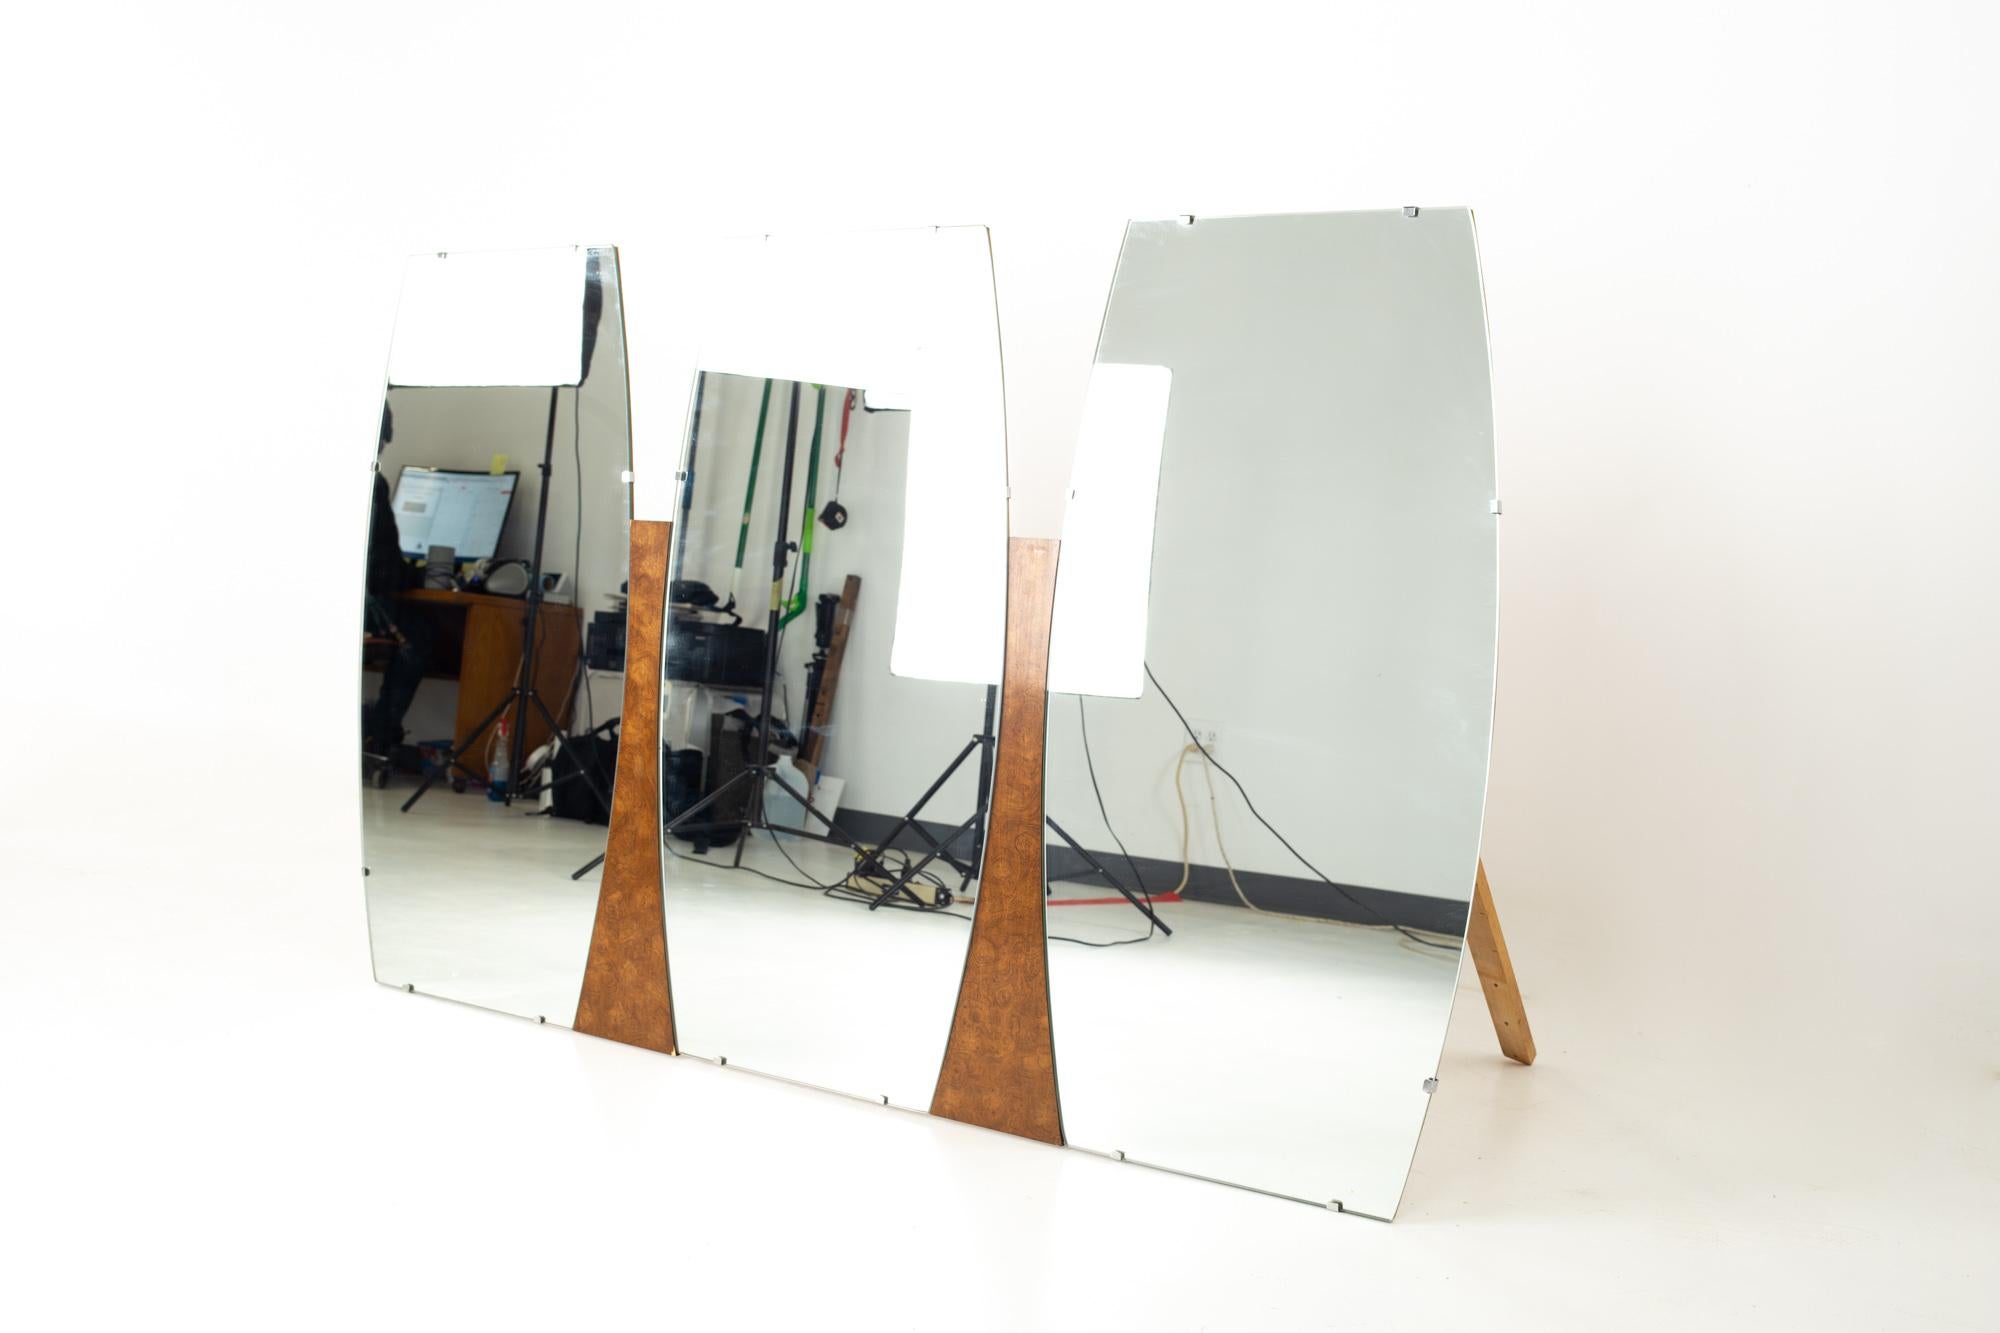 Milo Baughman Style Young Manufacturing Mid Century Walnut and Burlwood Mirror
Mirror measures: 64.5 wide x 2 deep x 40.5 inches high

All pieces of furniture can be had in what we call restored vintage condition. That means the piece is restored